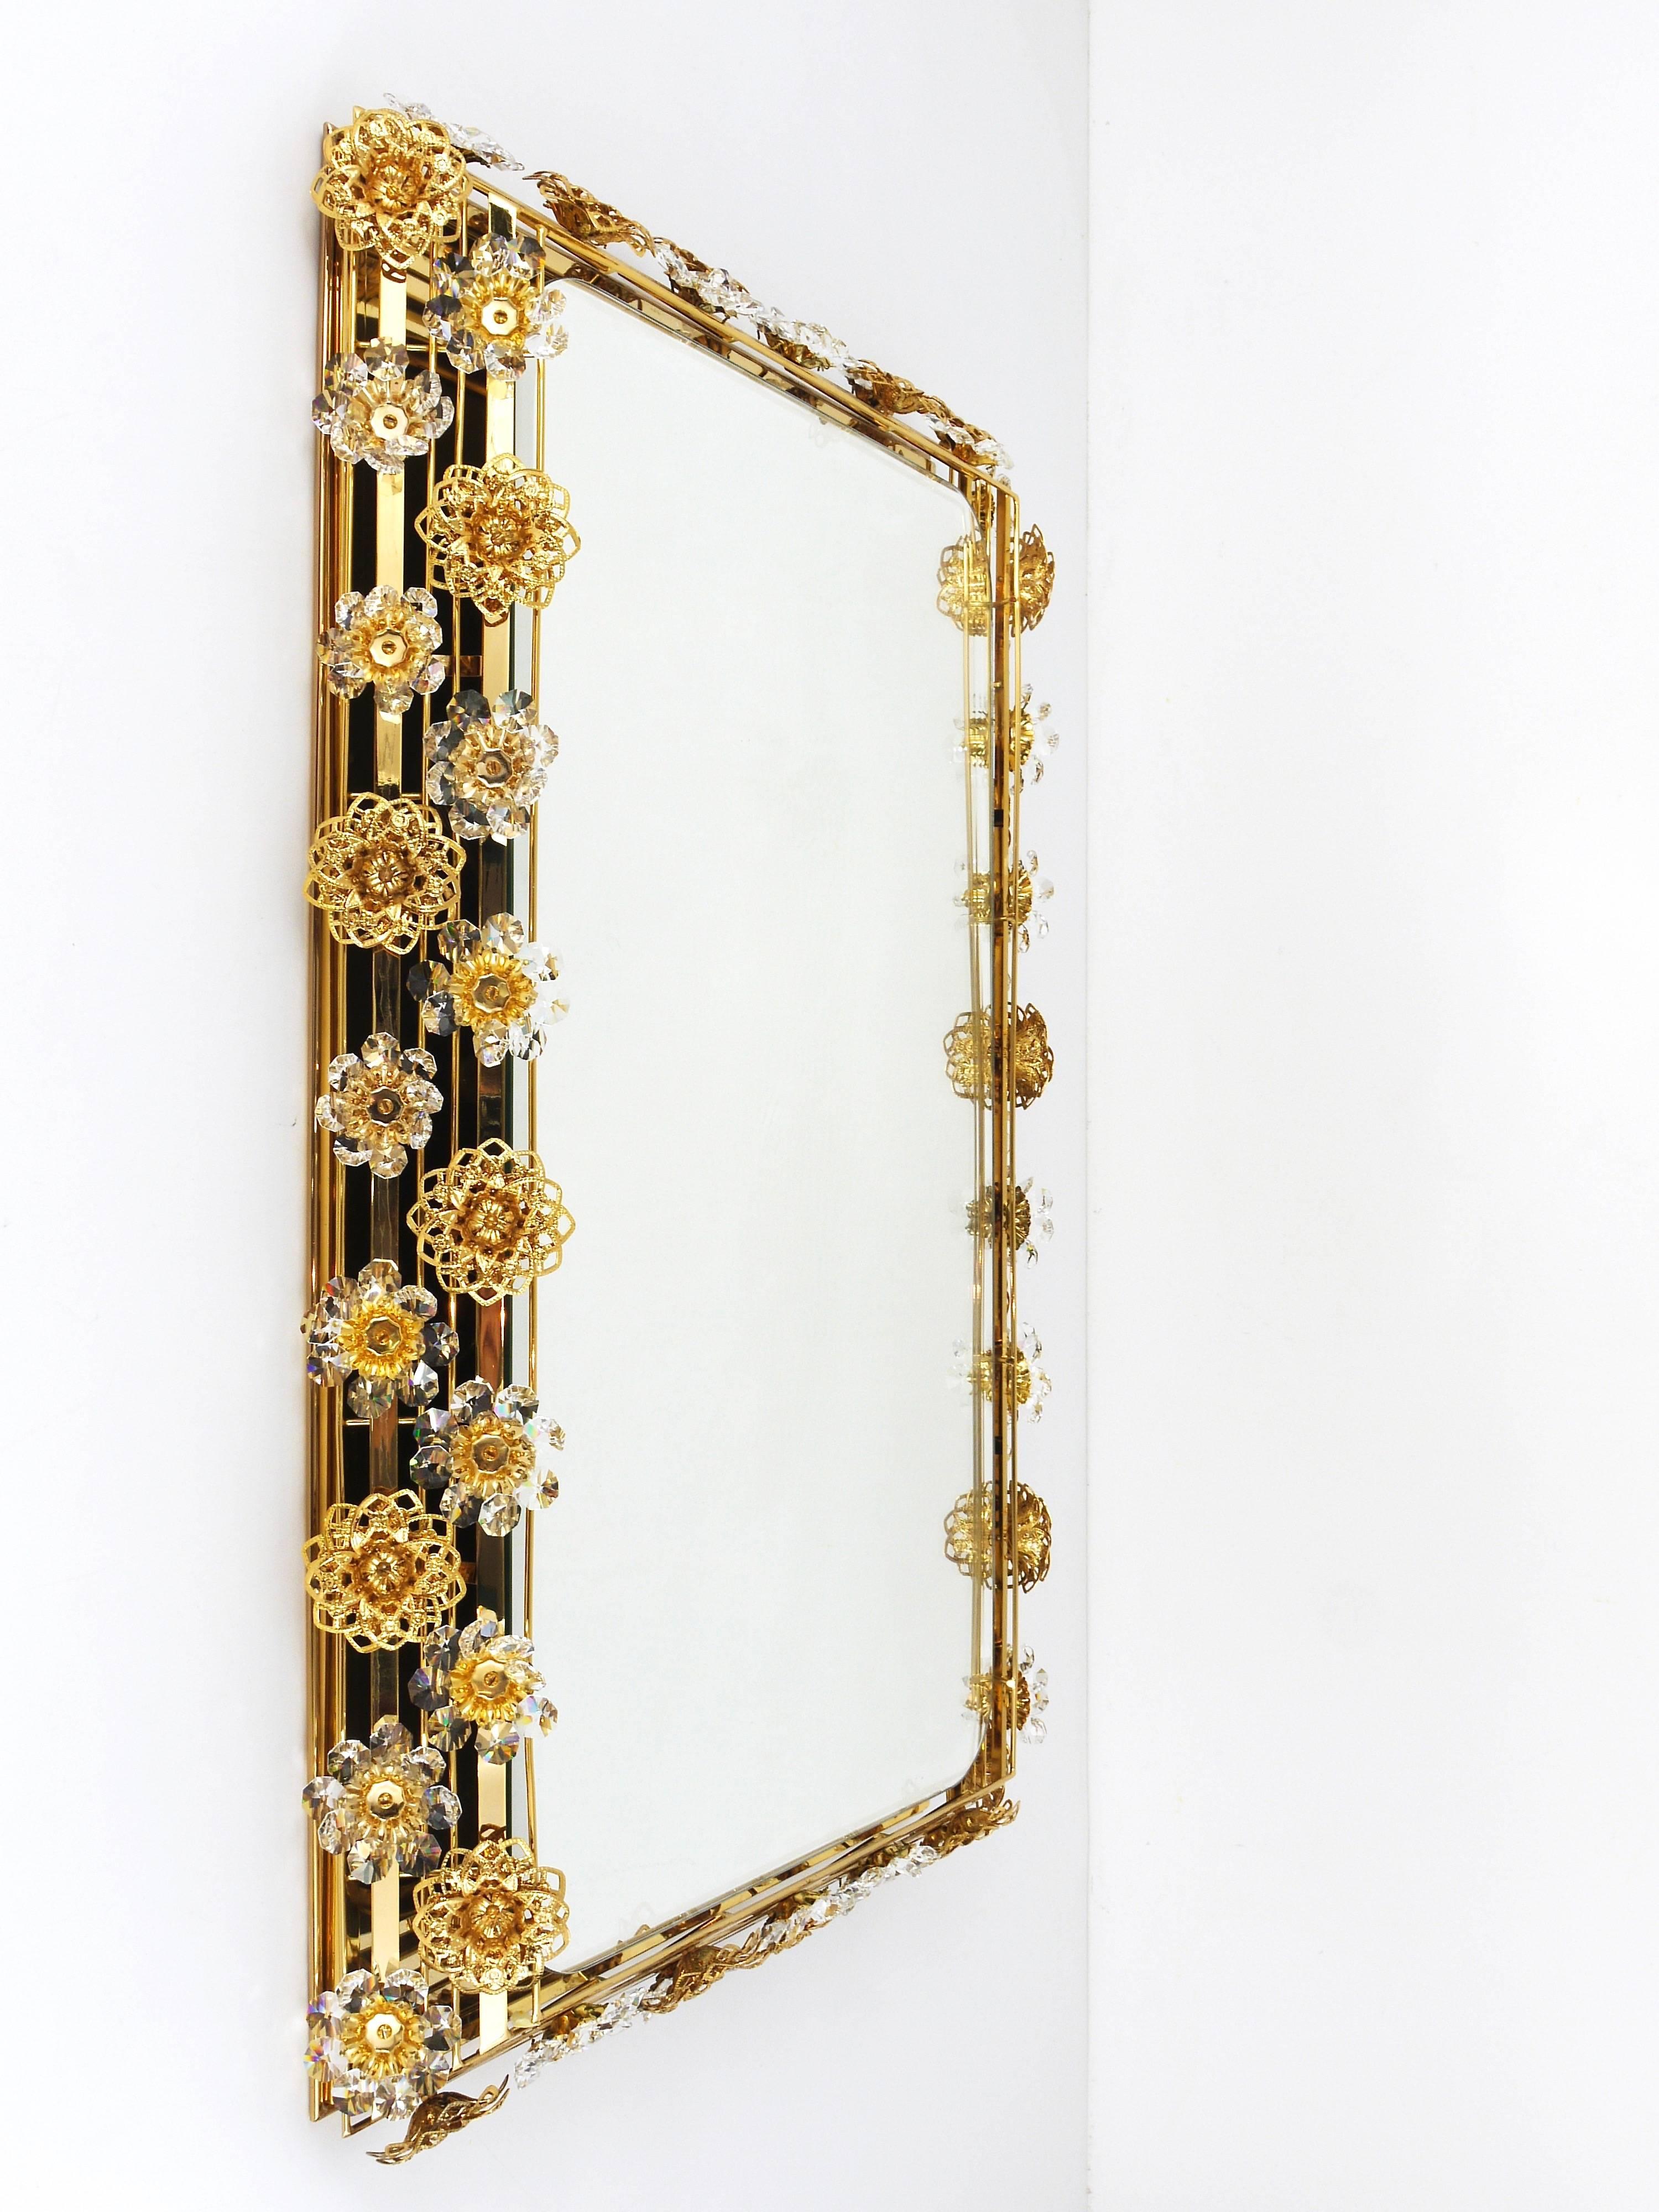 Ernst Palme Palwa Large Illuminated Flower Wall Mirror, Brass & Crystals, 1970s In Good Condition For Sale In Vienna, AT